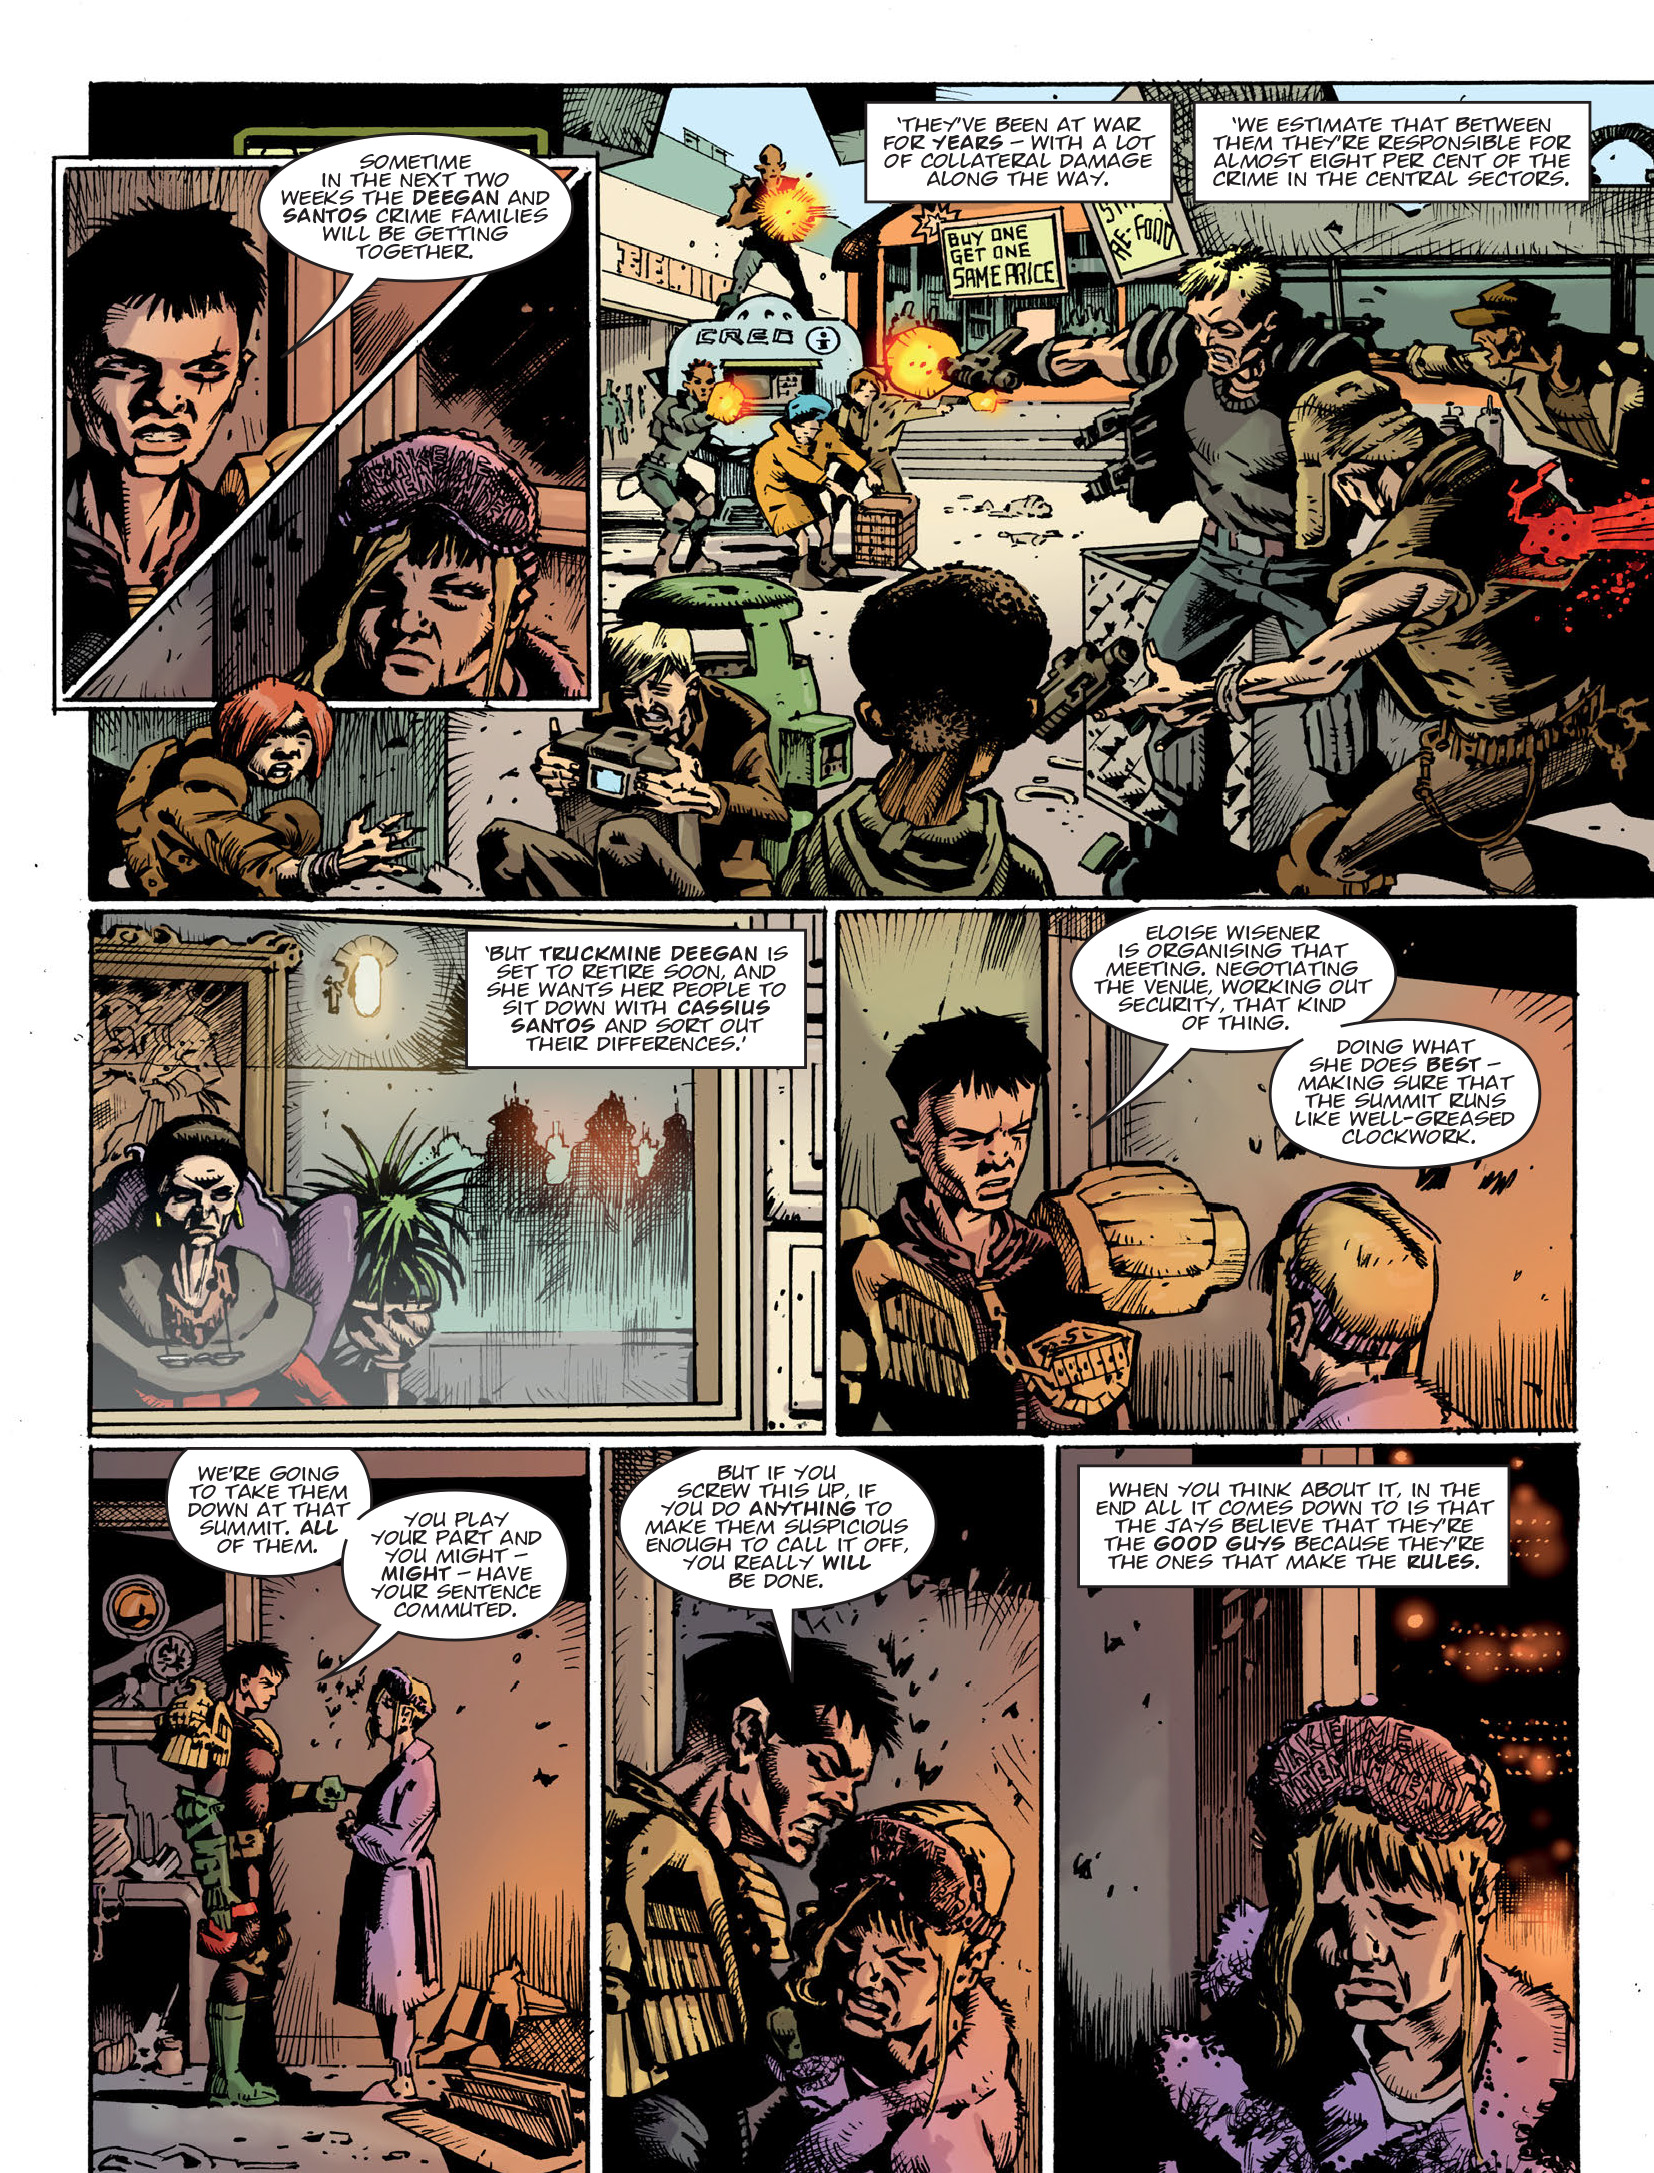 2000 AD: Chapter 2148 - Page 4